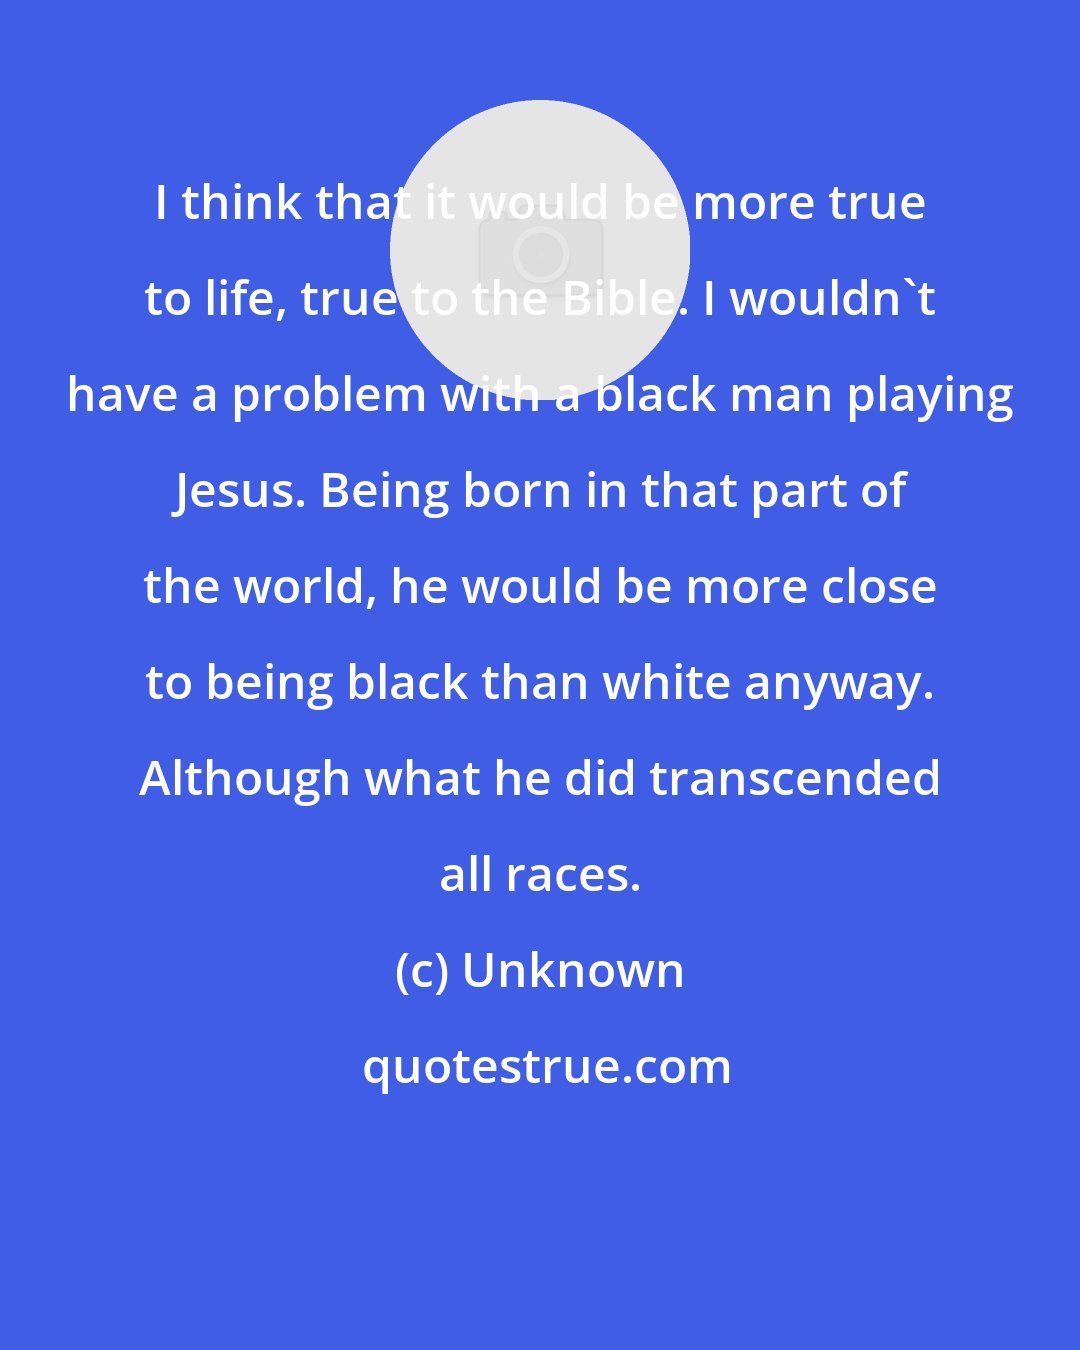 Unknown: I think that it would be more true to life, true to the Bible. I wouldn't have a problem with a black man playing Jesus. Being born in that part of the world, he would be more close to being black than white anyway. Although what he did transcended all races.